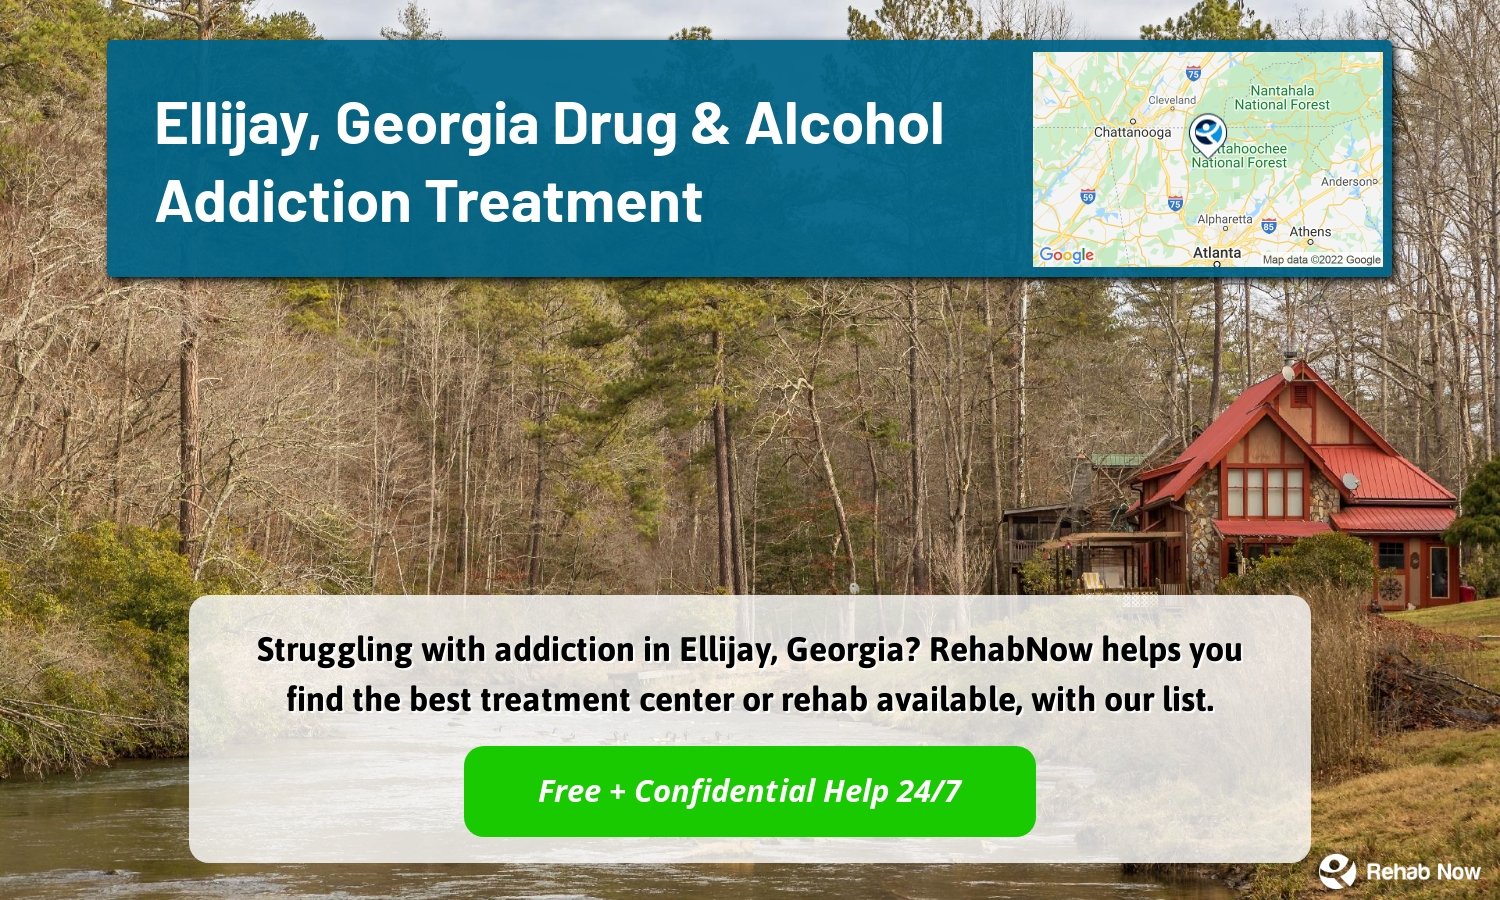 Struggling with addiction in Ellijay, Georgia? RehabNow helps you find the best treatment center or rehab available, with our list.